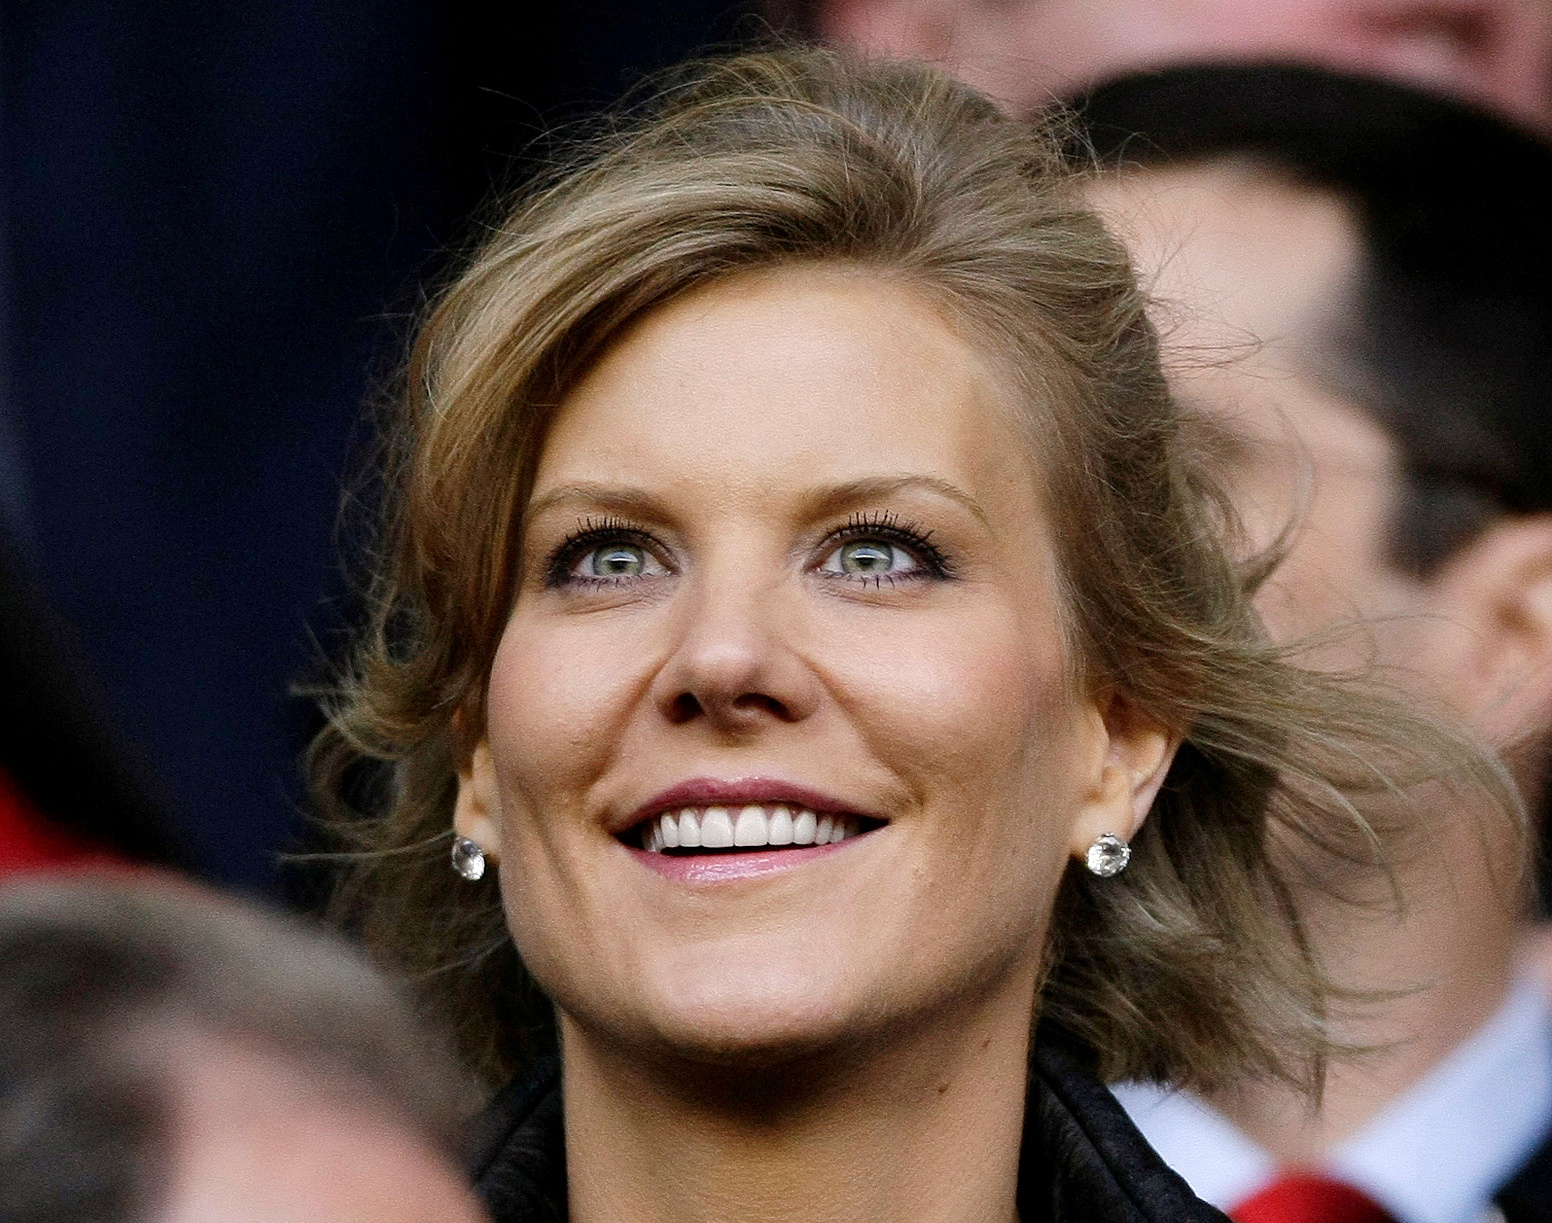 Dubai International Capital's chief negotiator Staveley smiles before the Champions League semi-final match in Liverpool